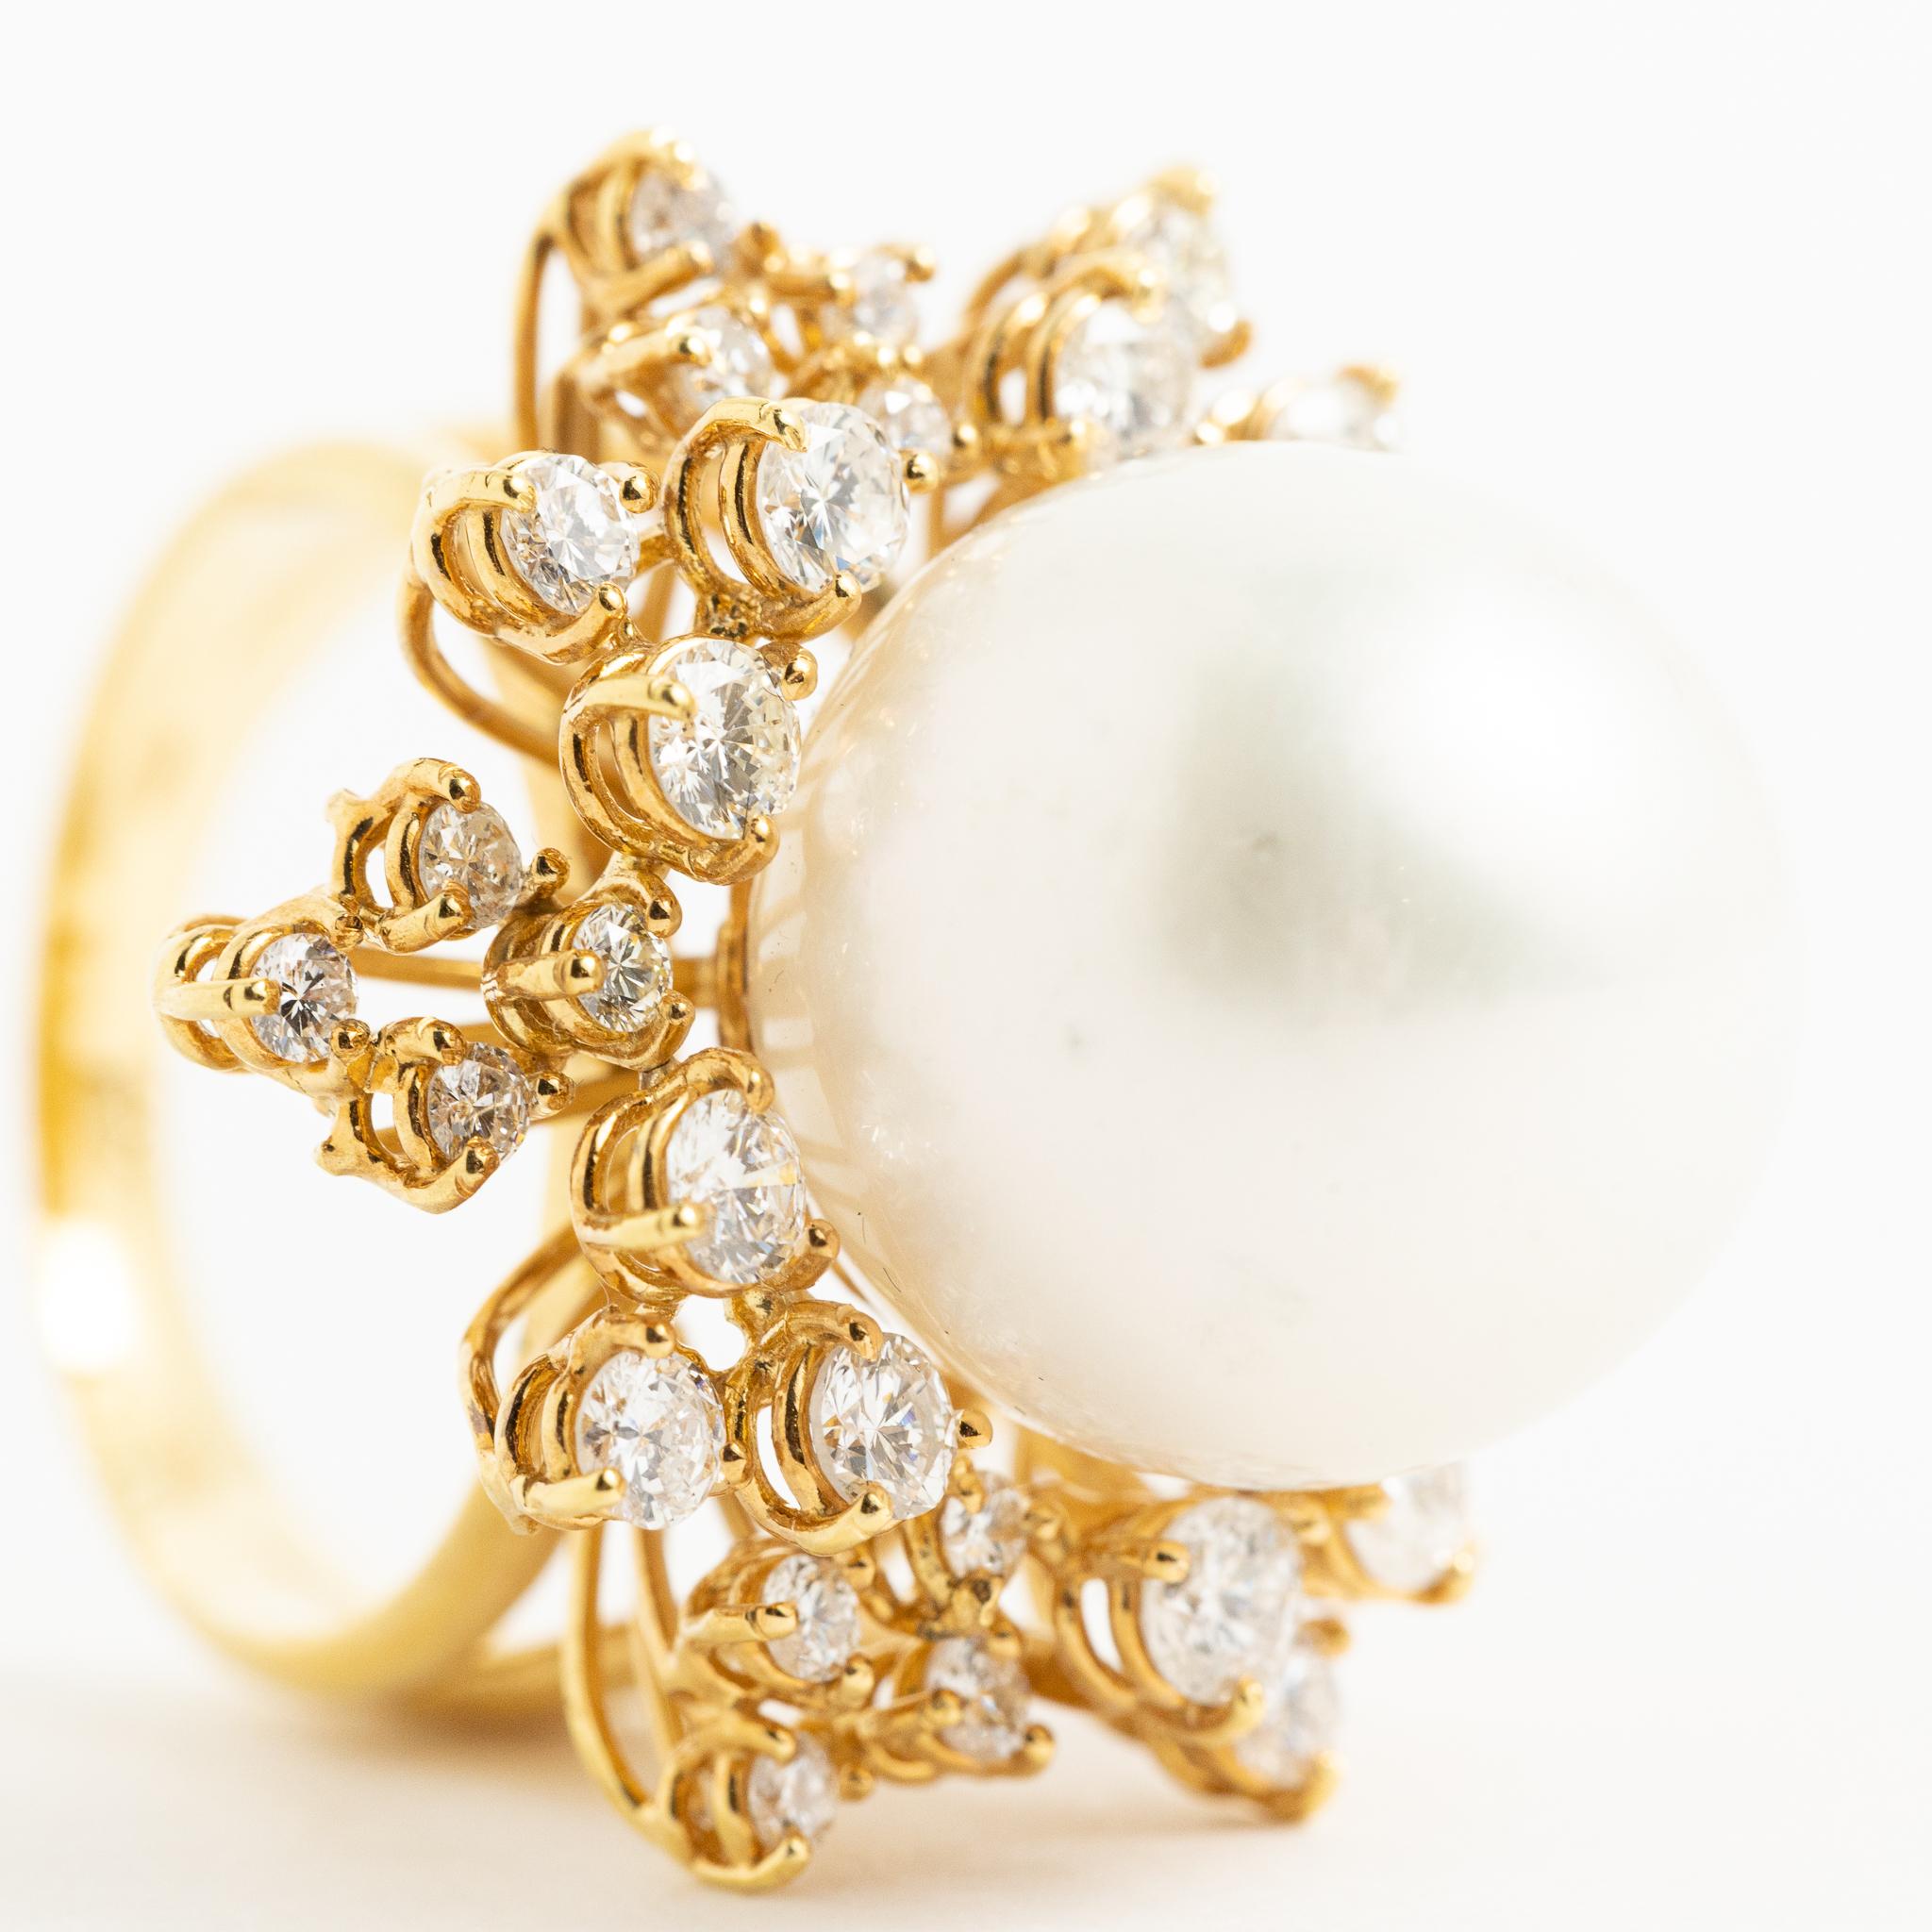 1980 18 Karat Yellow Gold Diamonds, 16 mm. South Sea Pearl Cocktail Ring For Sale 4